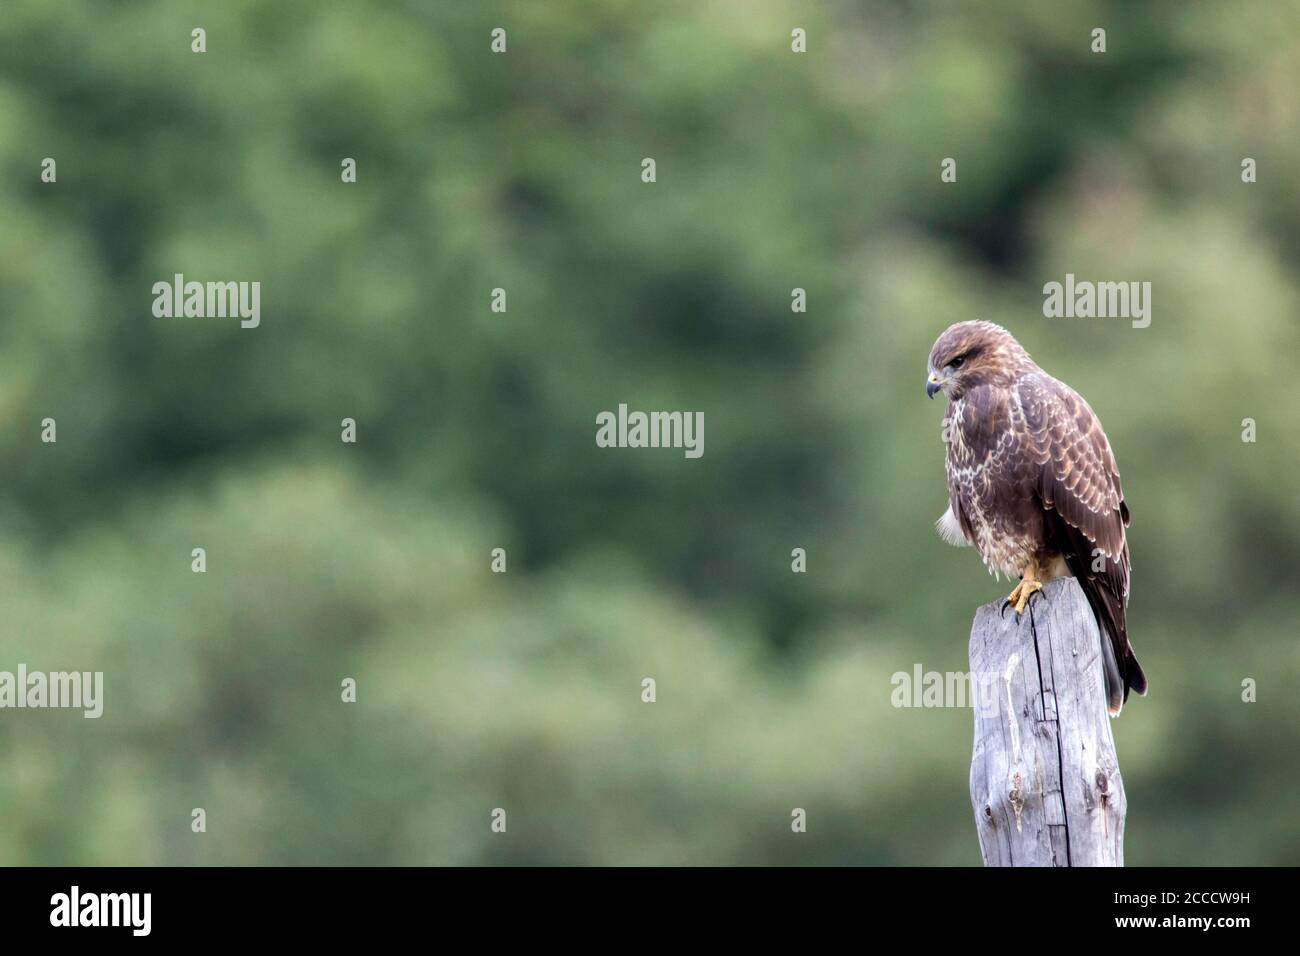 Common Buzzard, Buteo buteo) perched on a wooden pole in Asturias, Spain. With a green forest as a background. Stock Photo